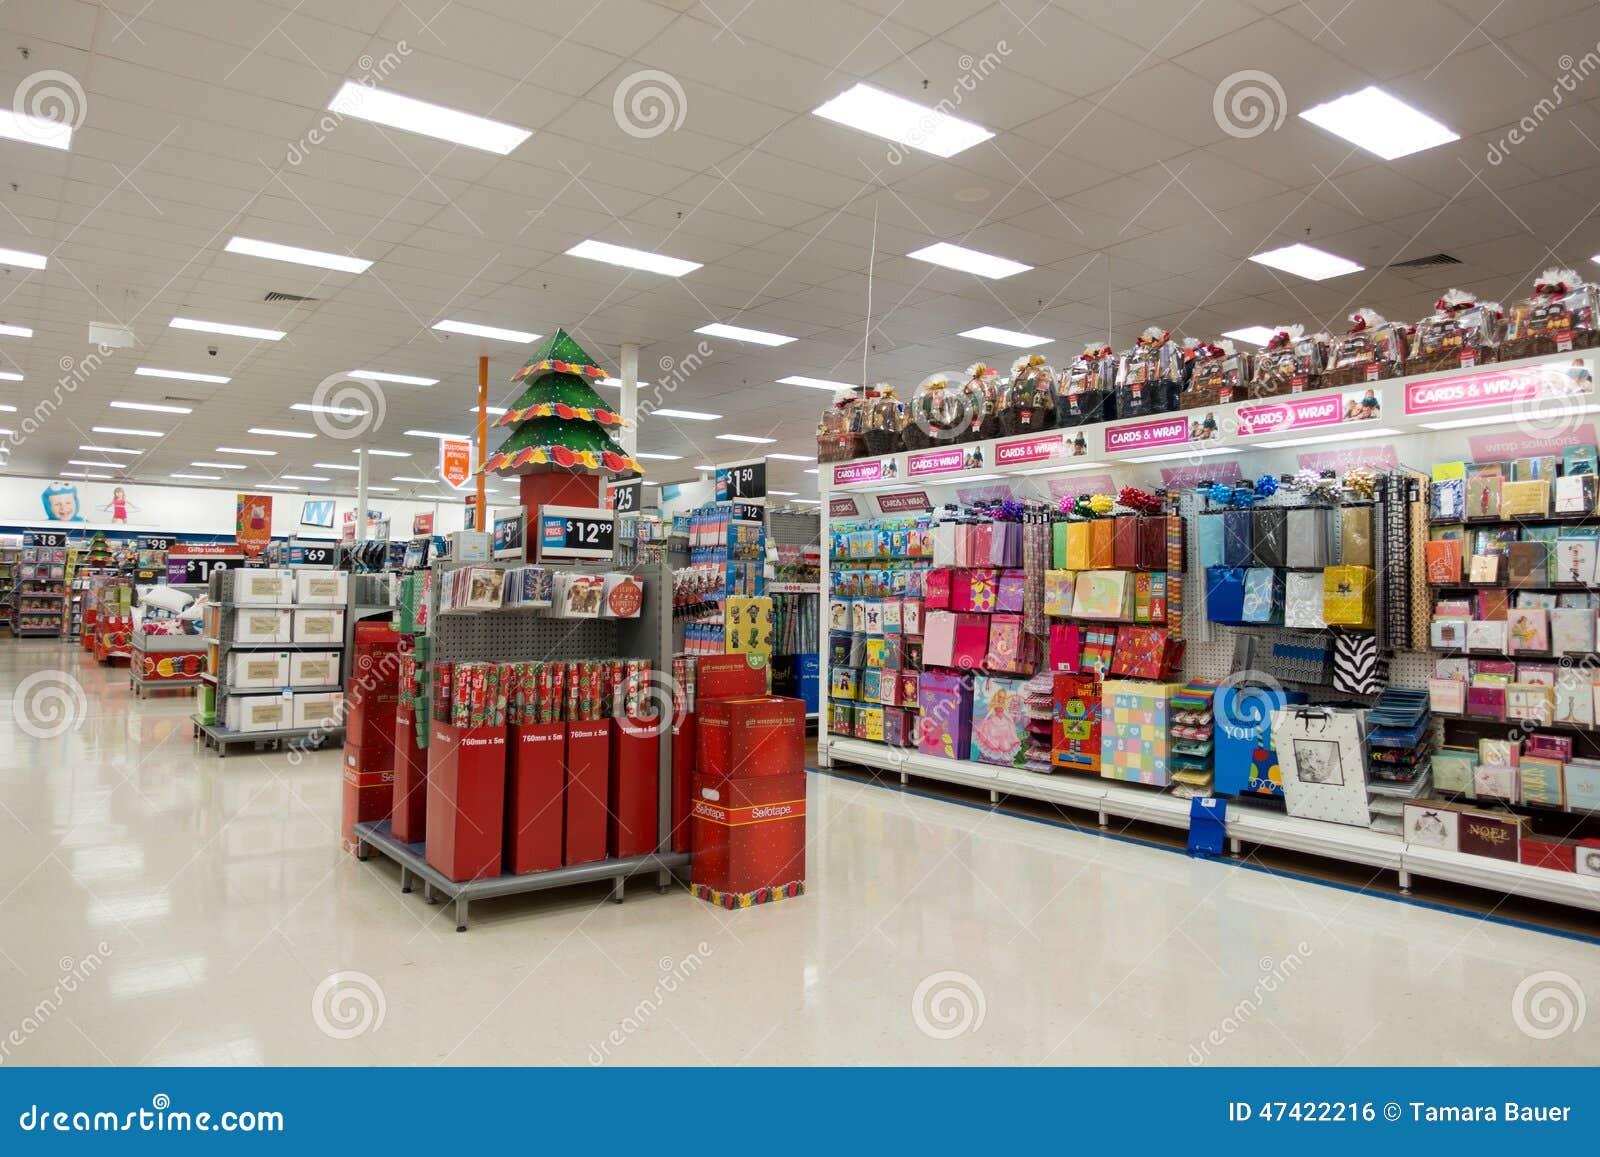 Christmas Decorations, Big W Superstore Editorial Photo - Image of ...